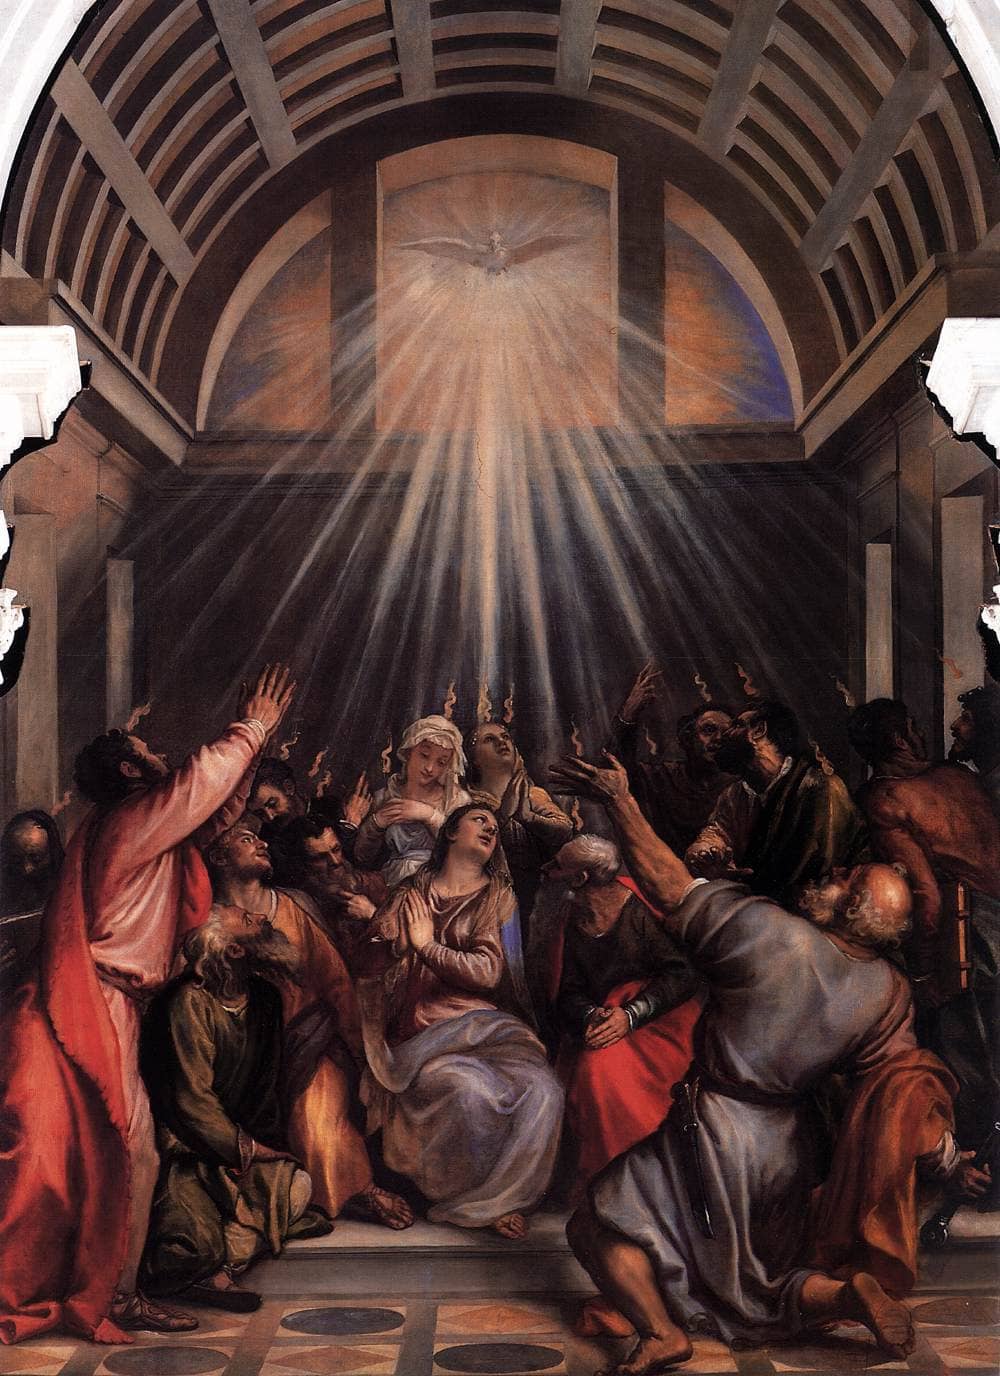 The Descent of the Holy Ghost by Titian, circa 1545